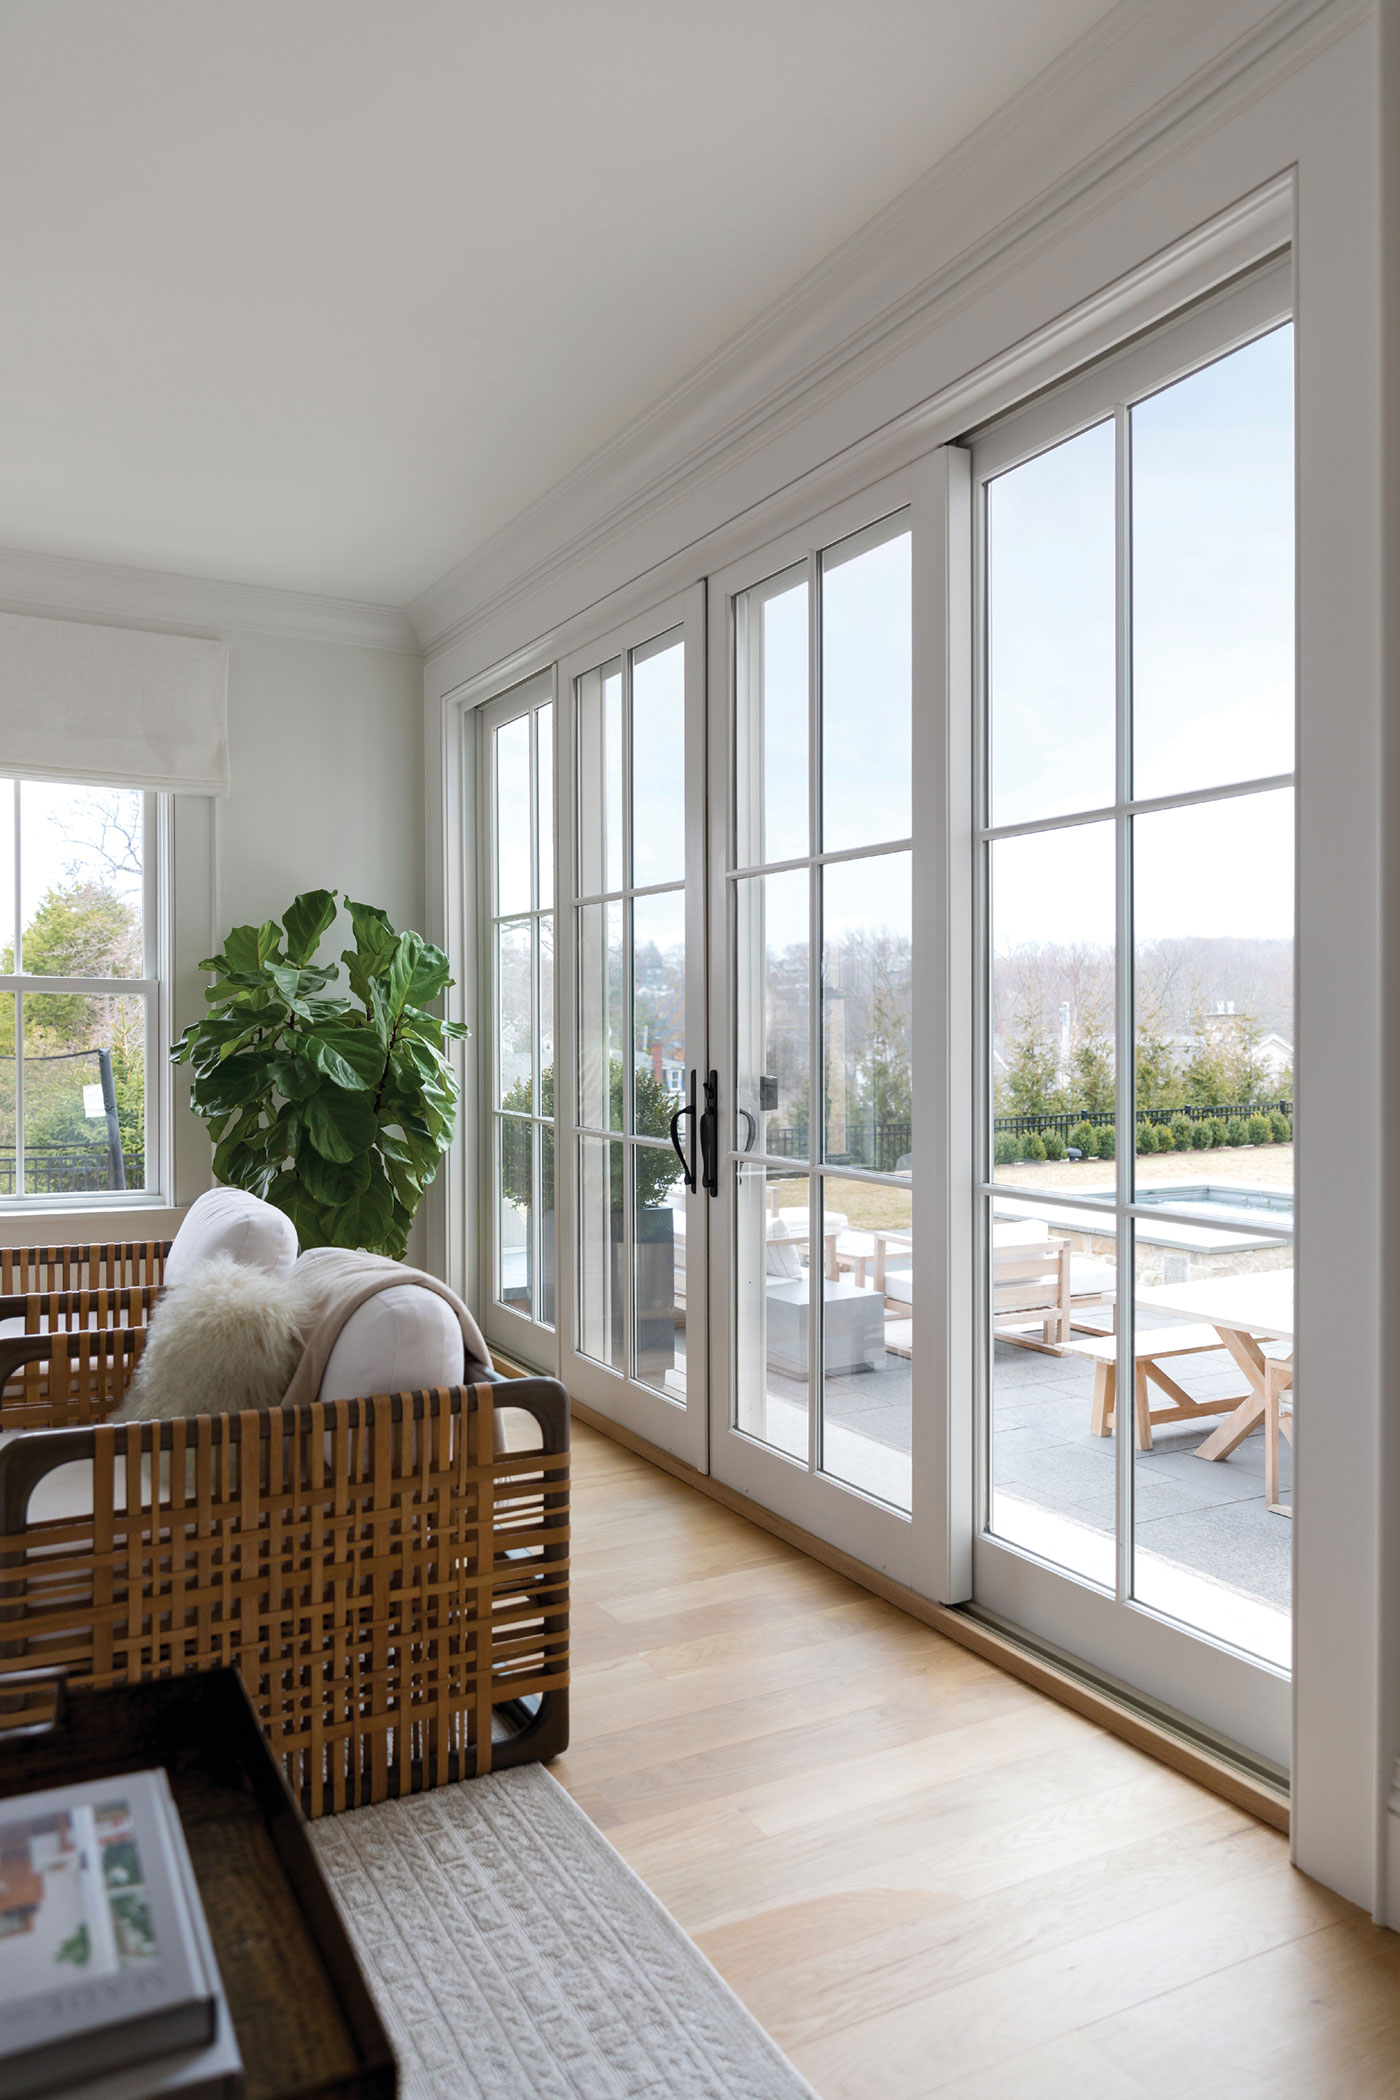 Tall, floor-to-ceiling windows provide beautiful views of the outdoors and also protection from inclement weather.